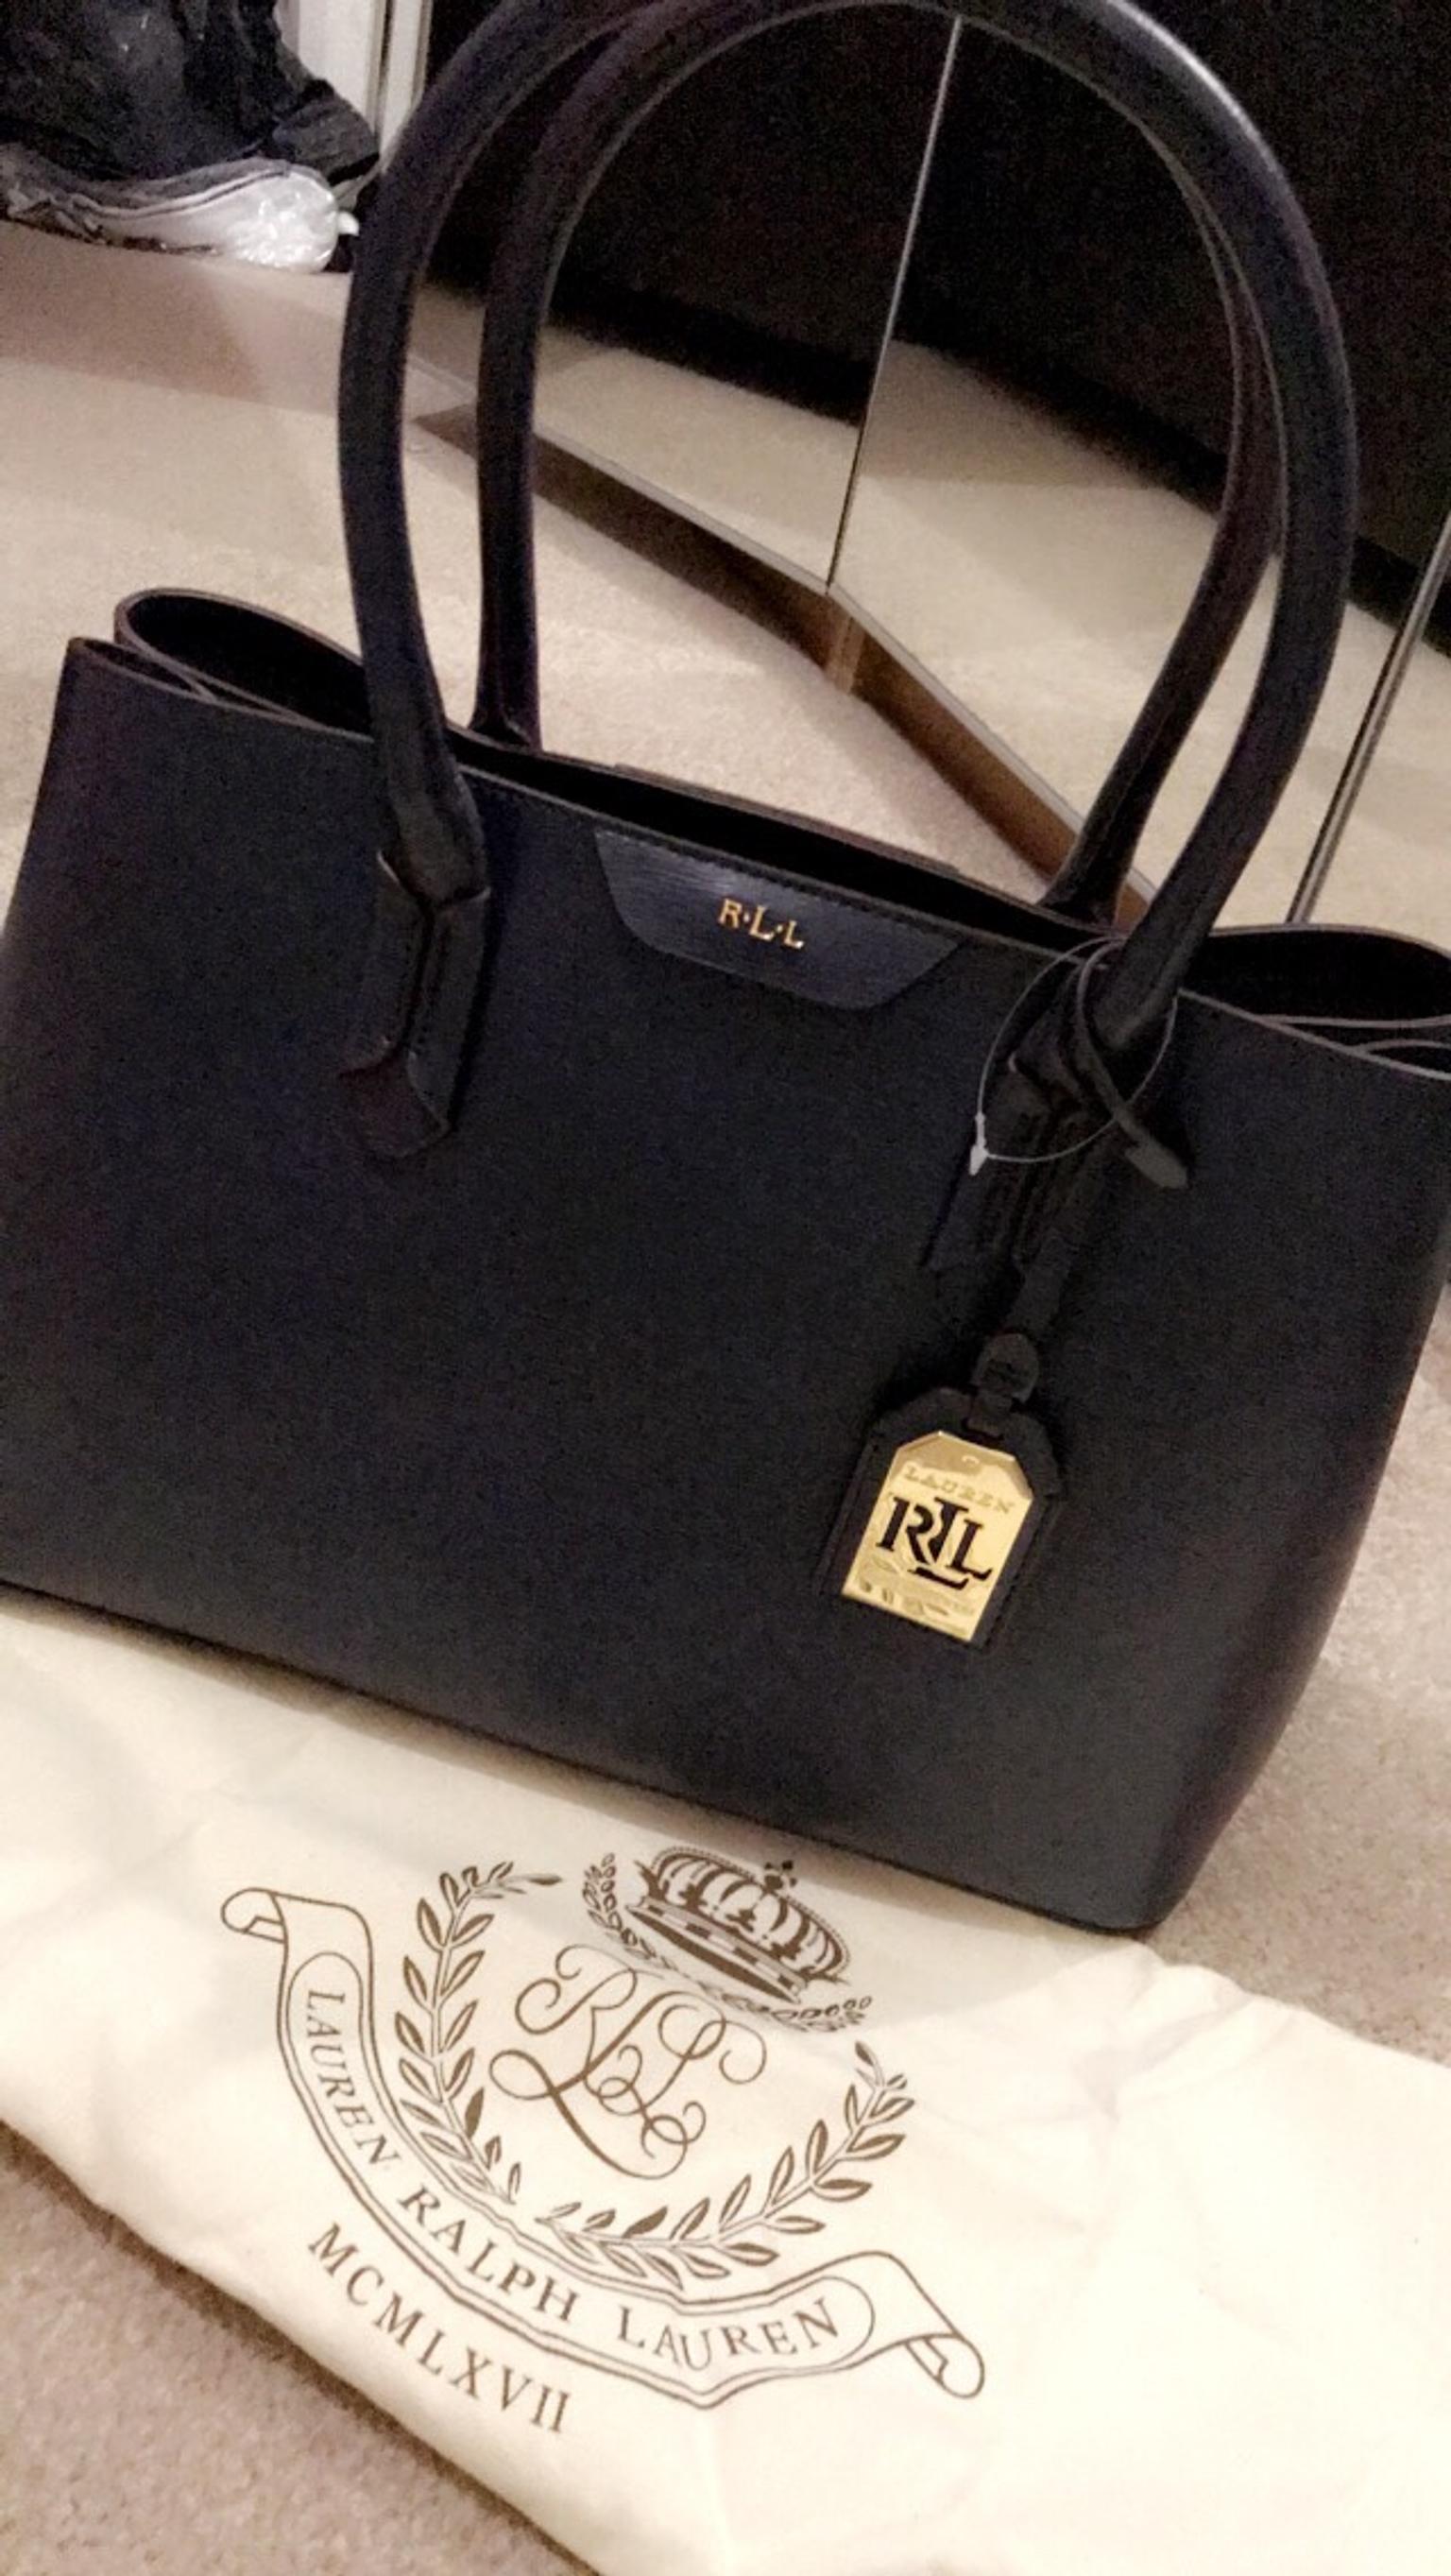 rll bags